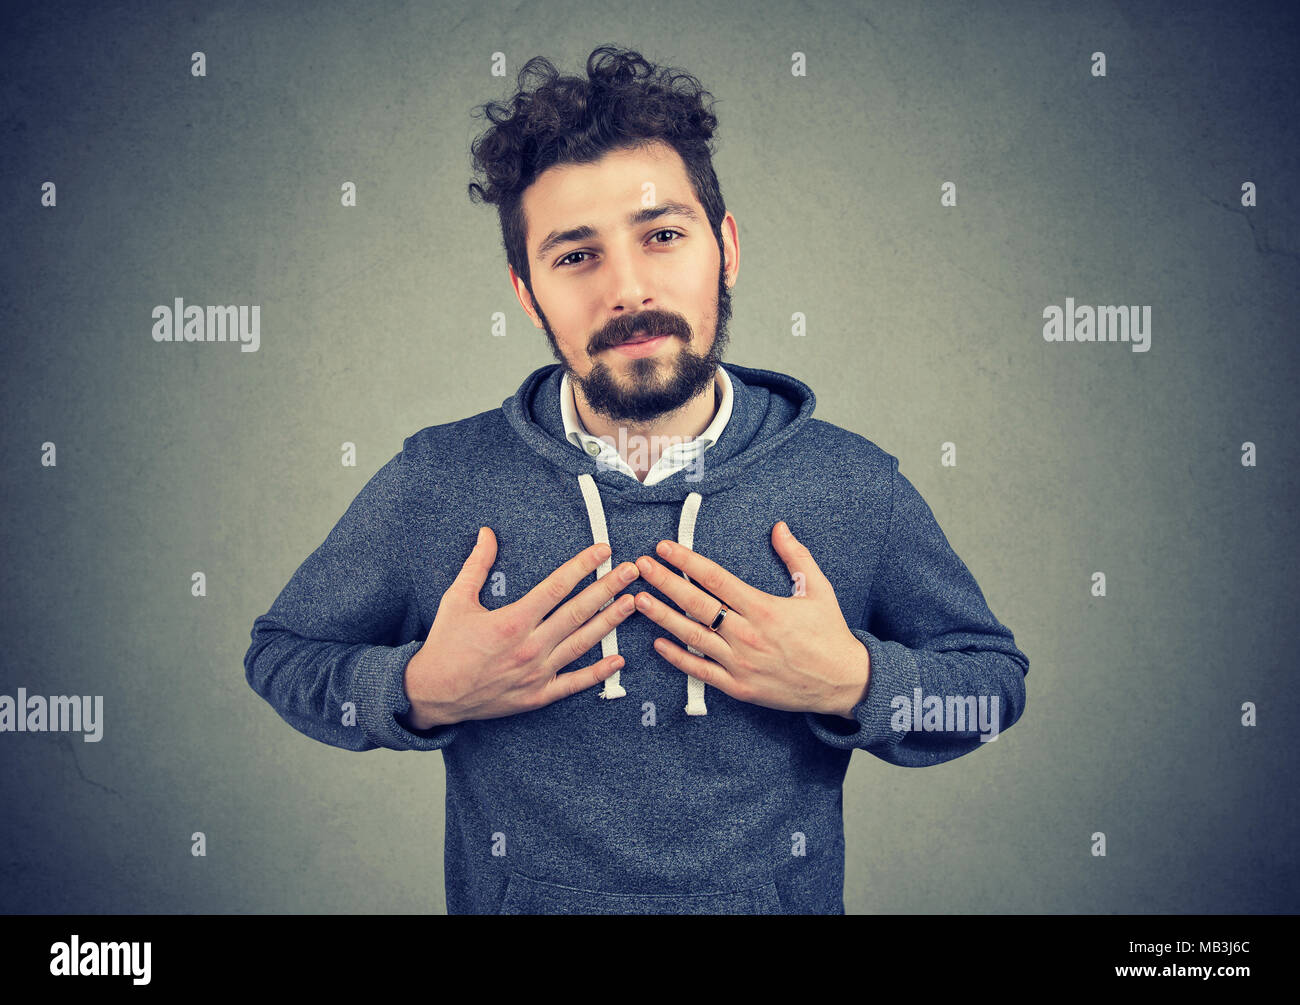 Faithful man keeps hands on chest near heart, shows kindness expresses sincere emotions, being kind hearted and honest. Stock Photo